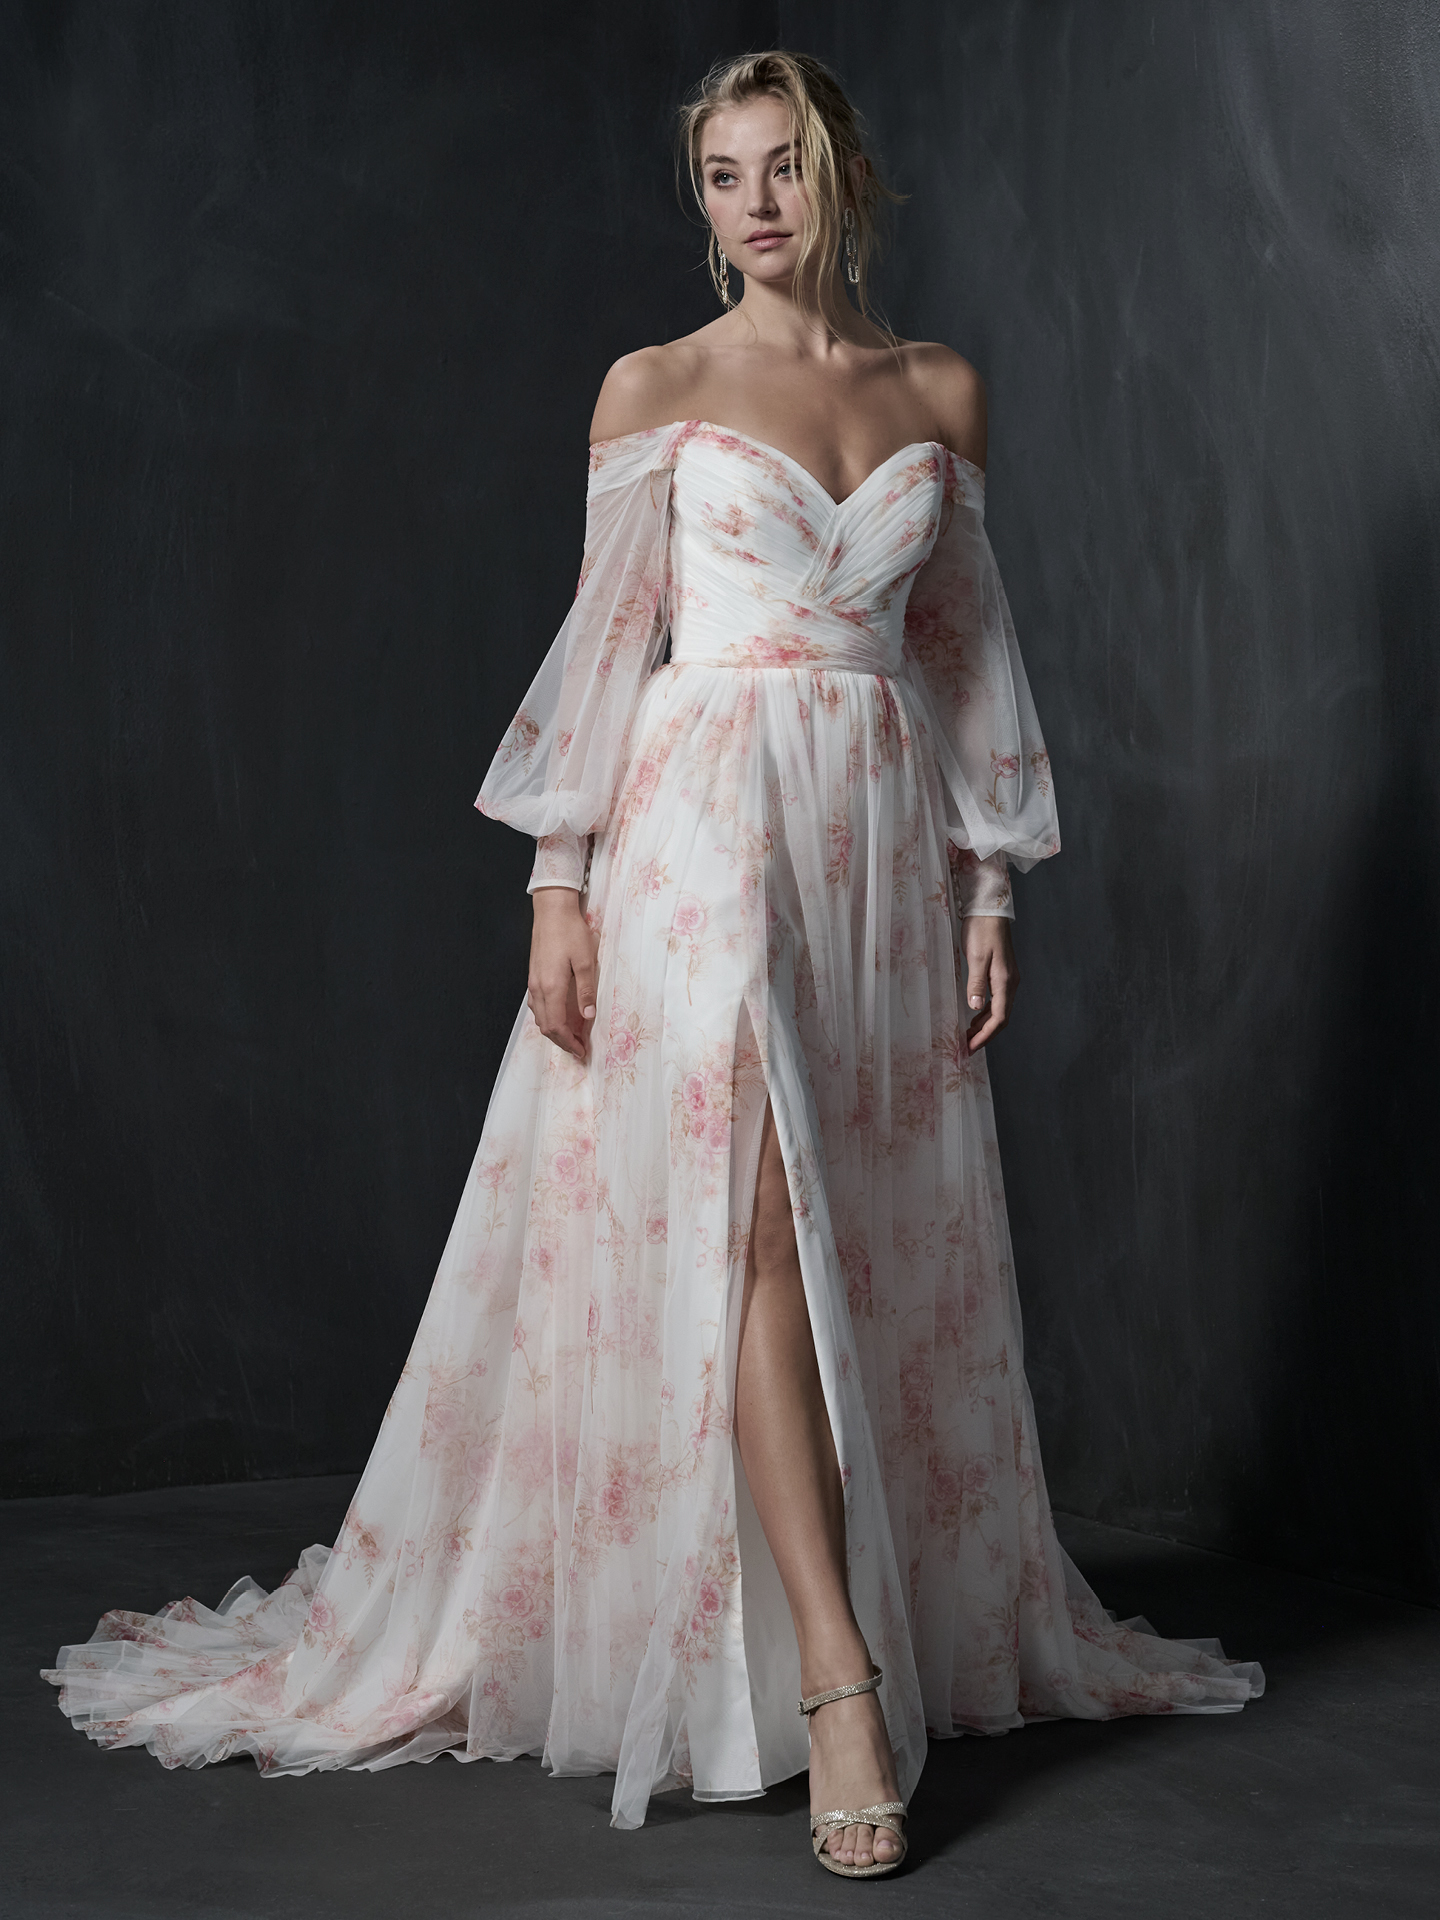 Bride Wearing An Off The Shoulder Wedding Dress Called Nerida By Sottero And Midgley